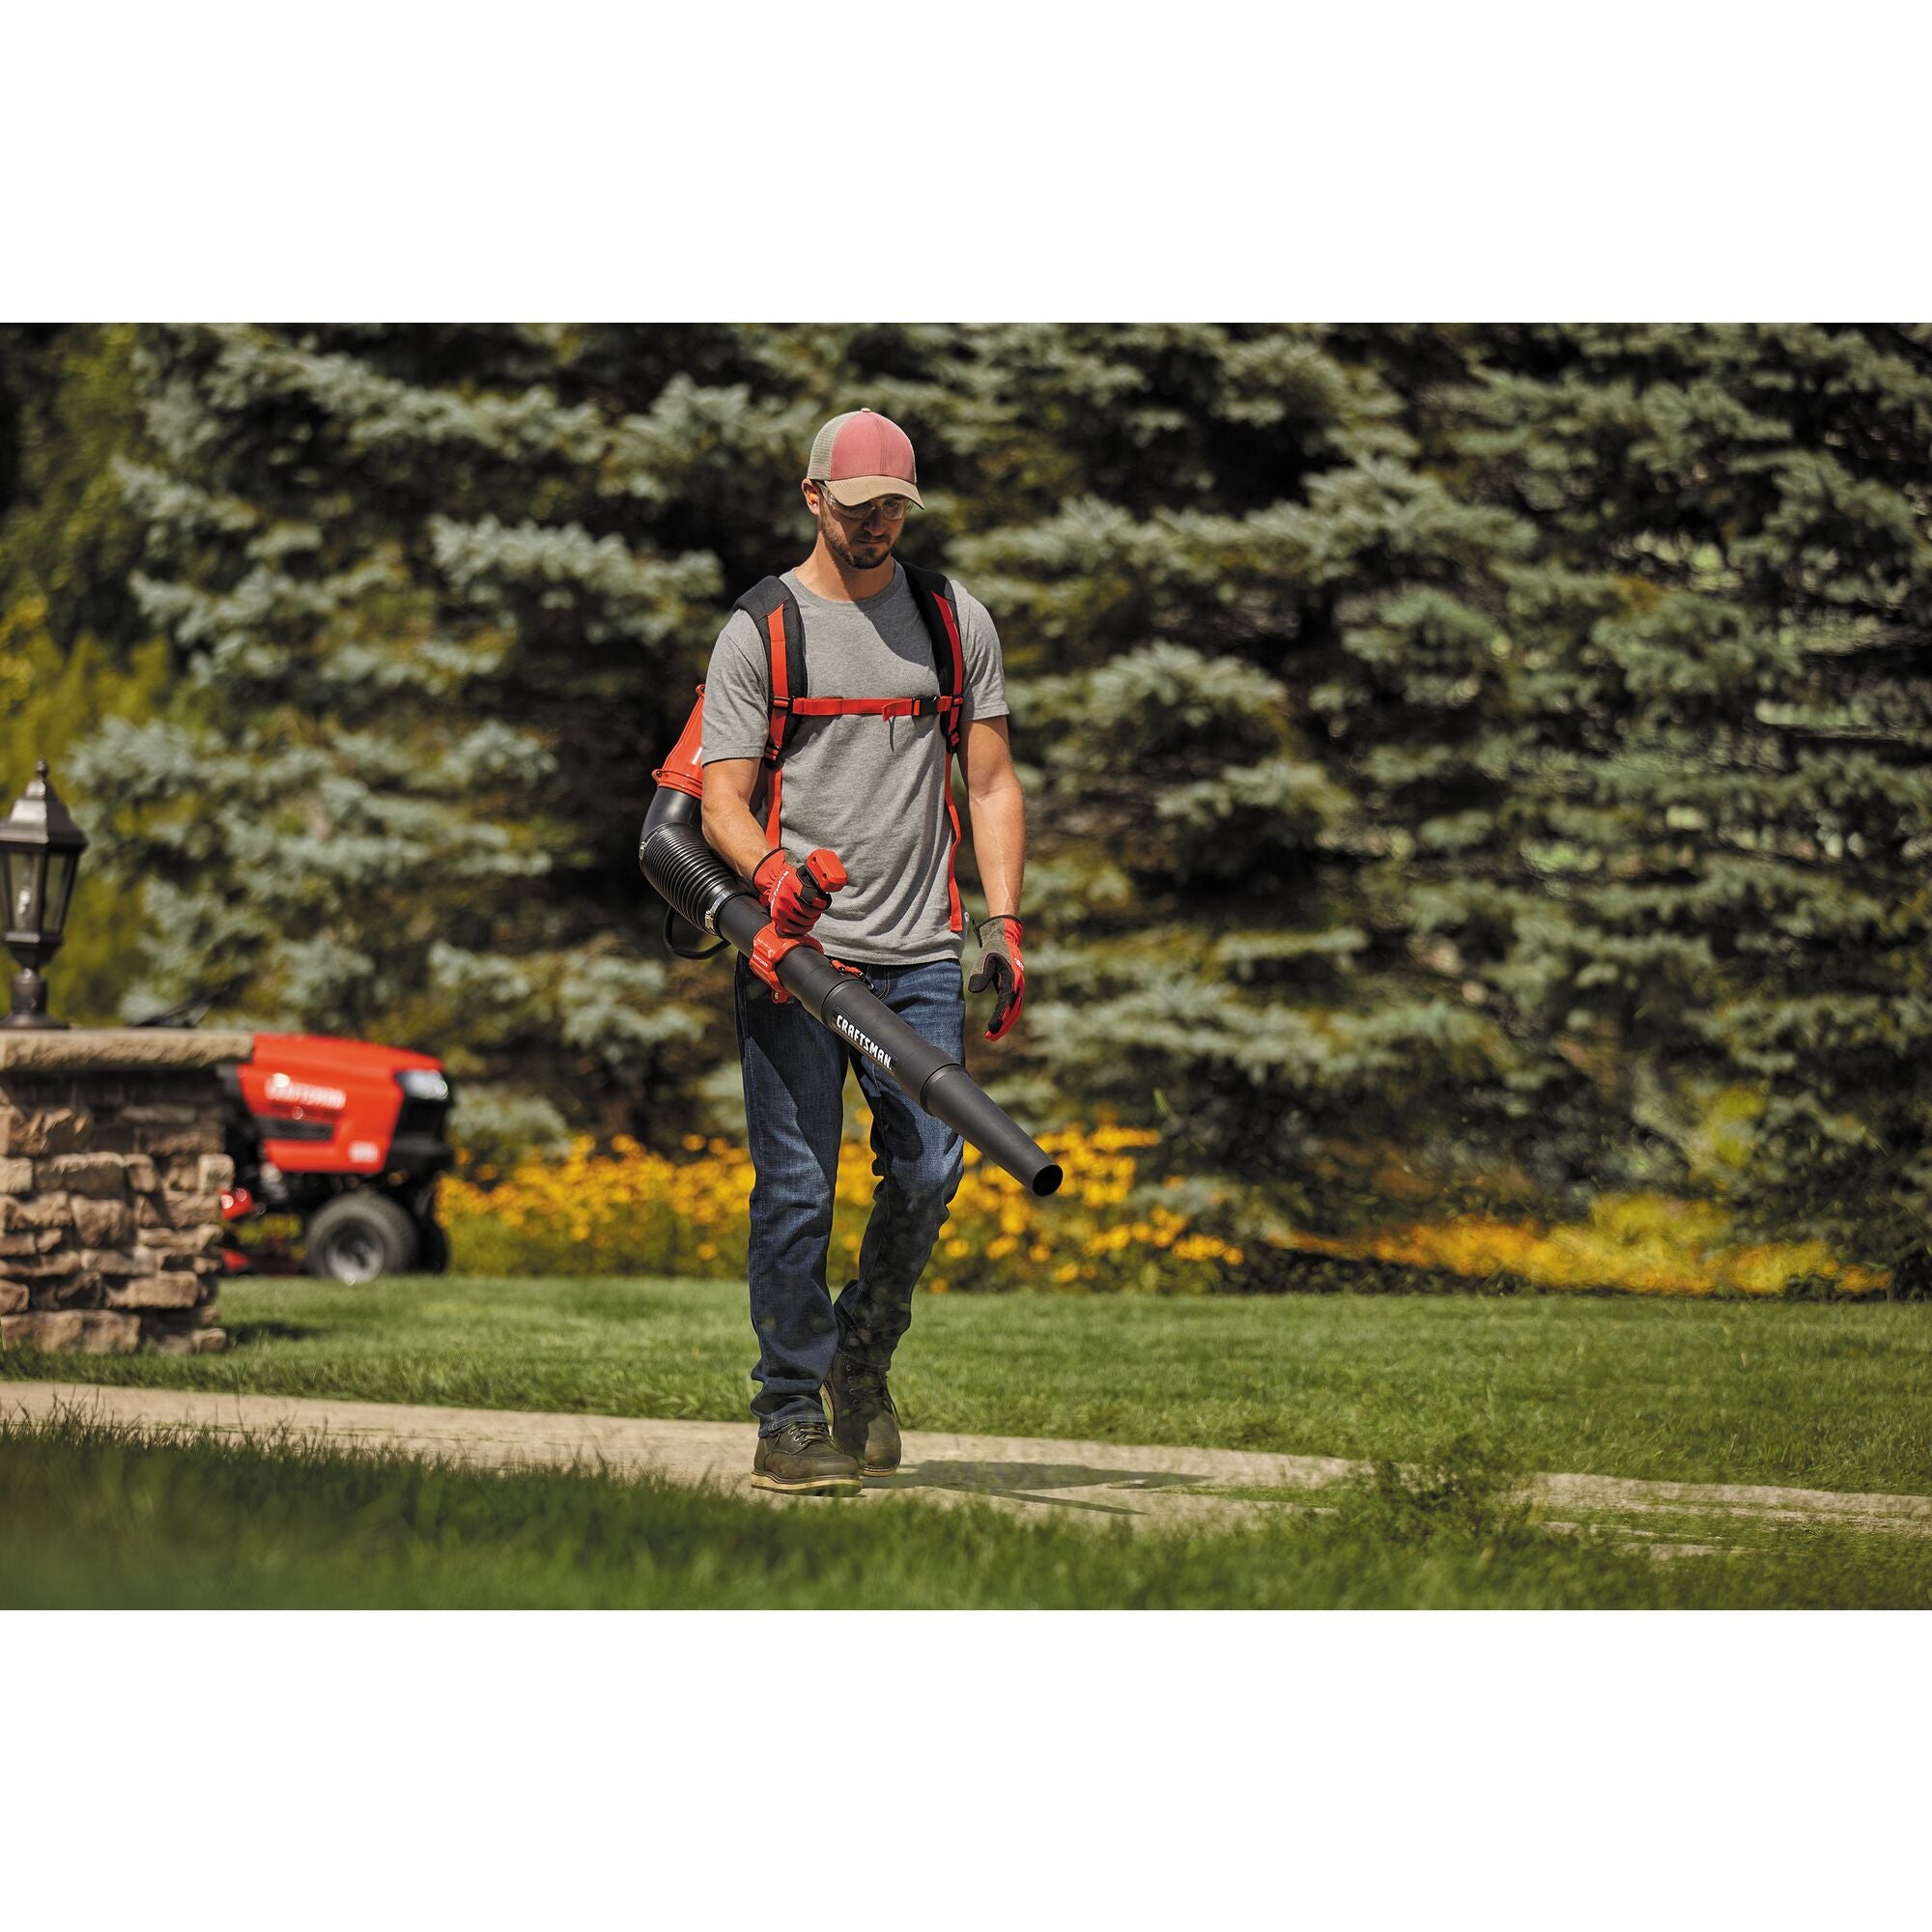 51 C C 2 cycle gas backpack leaf blower being used by a person to clean outdoor area.